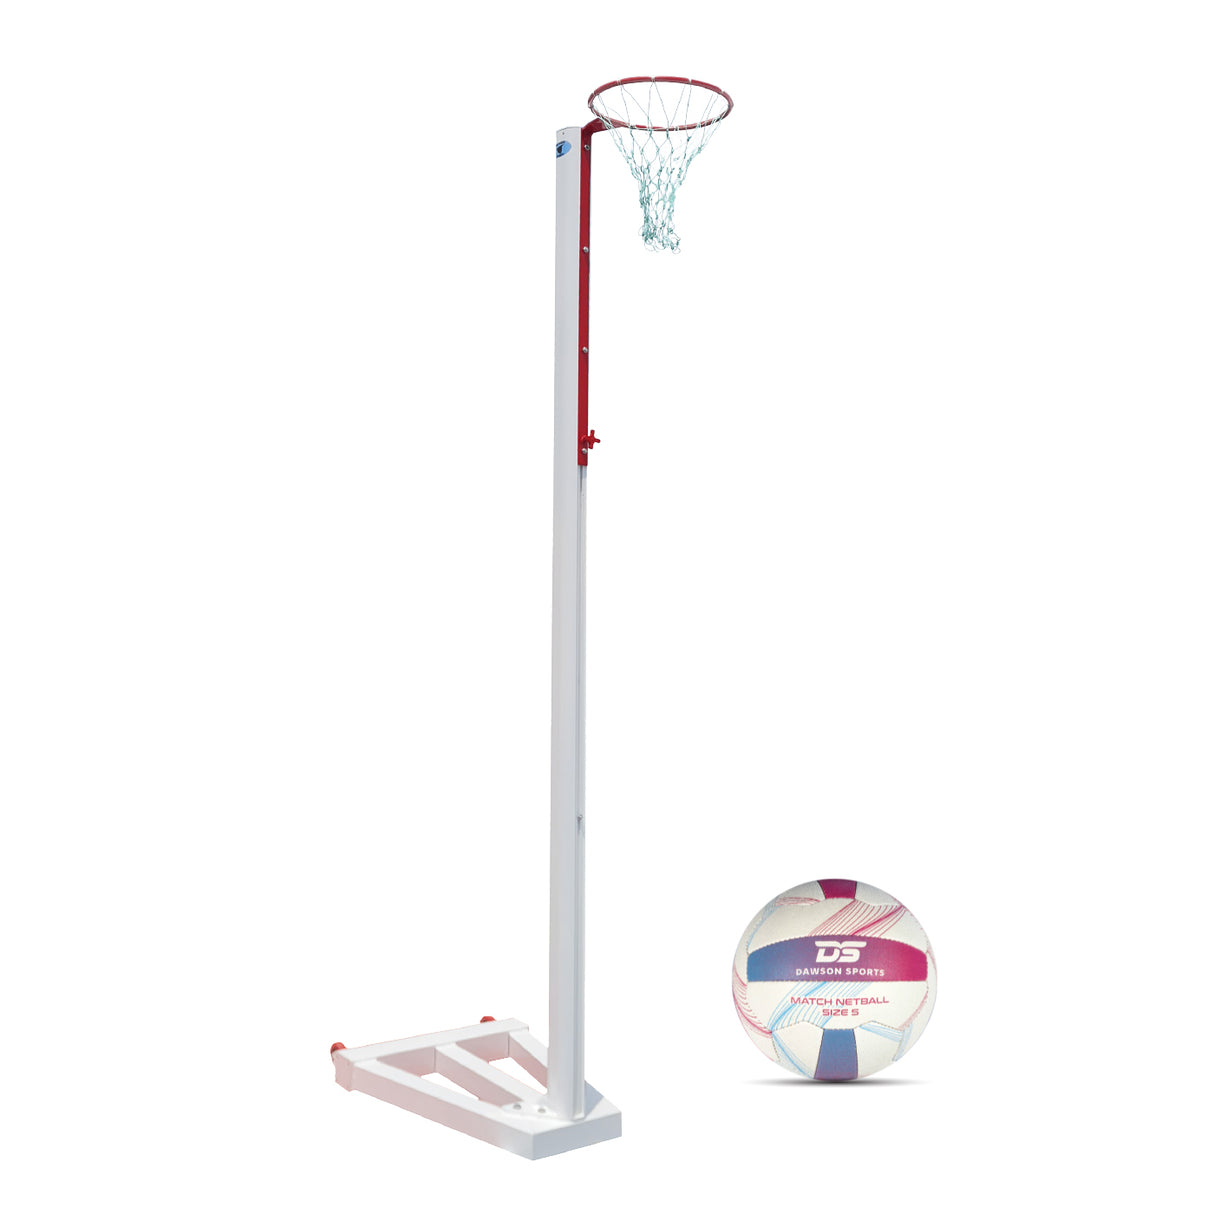 Competition Netball Post Value Bundle FREE Netball